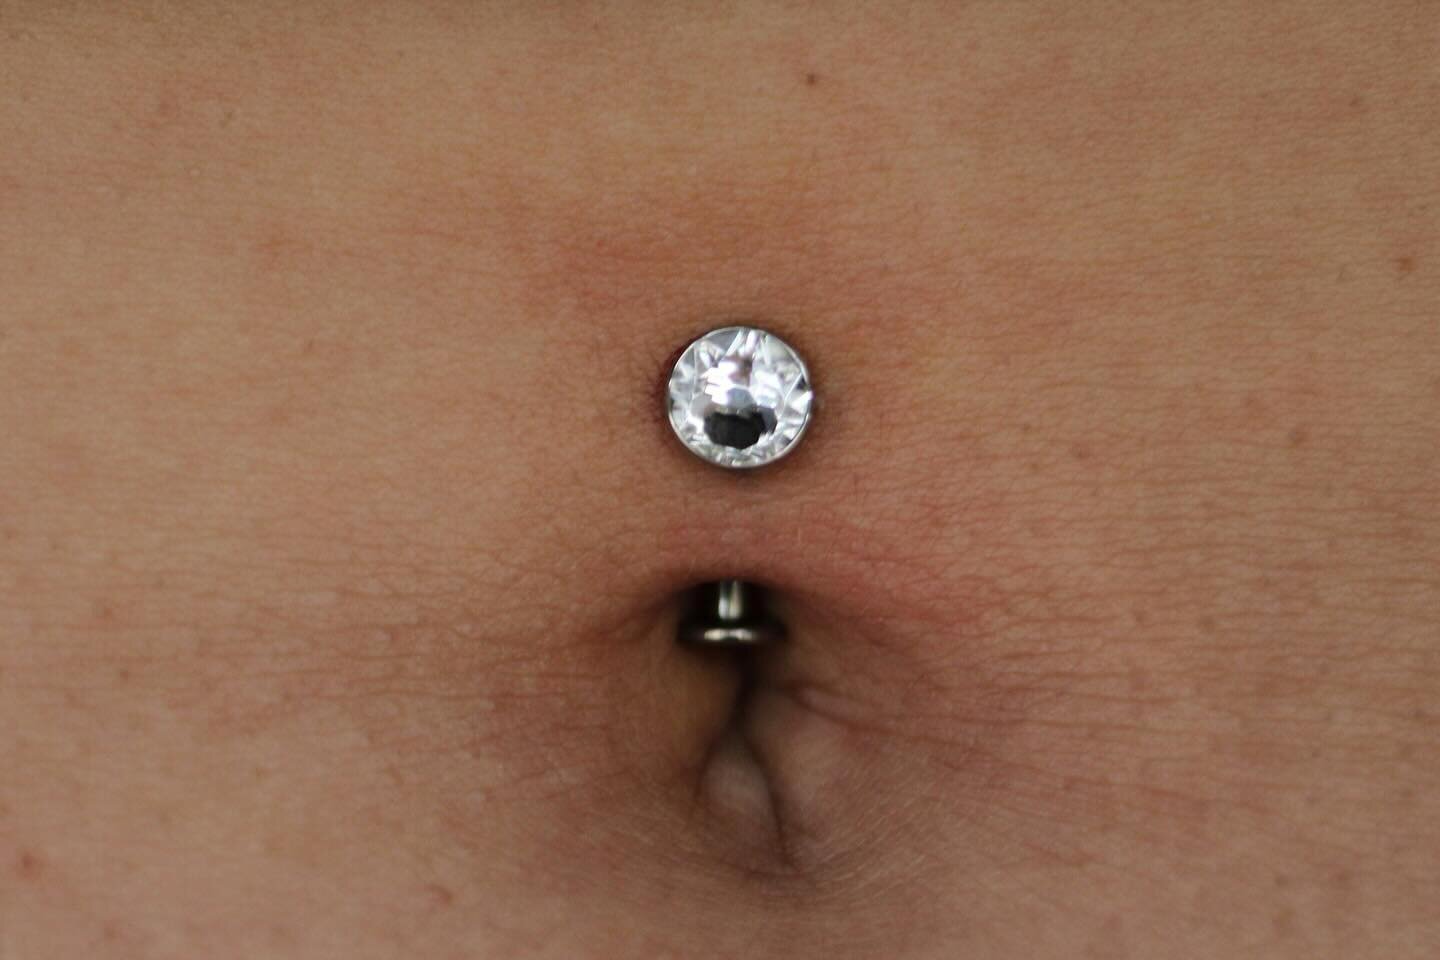 It&rsquo;s navel season besties 👯 here&rsquo;s a 12g floating navel I had the privilege to pierce at @oldtraditionsbodyart